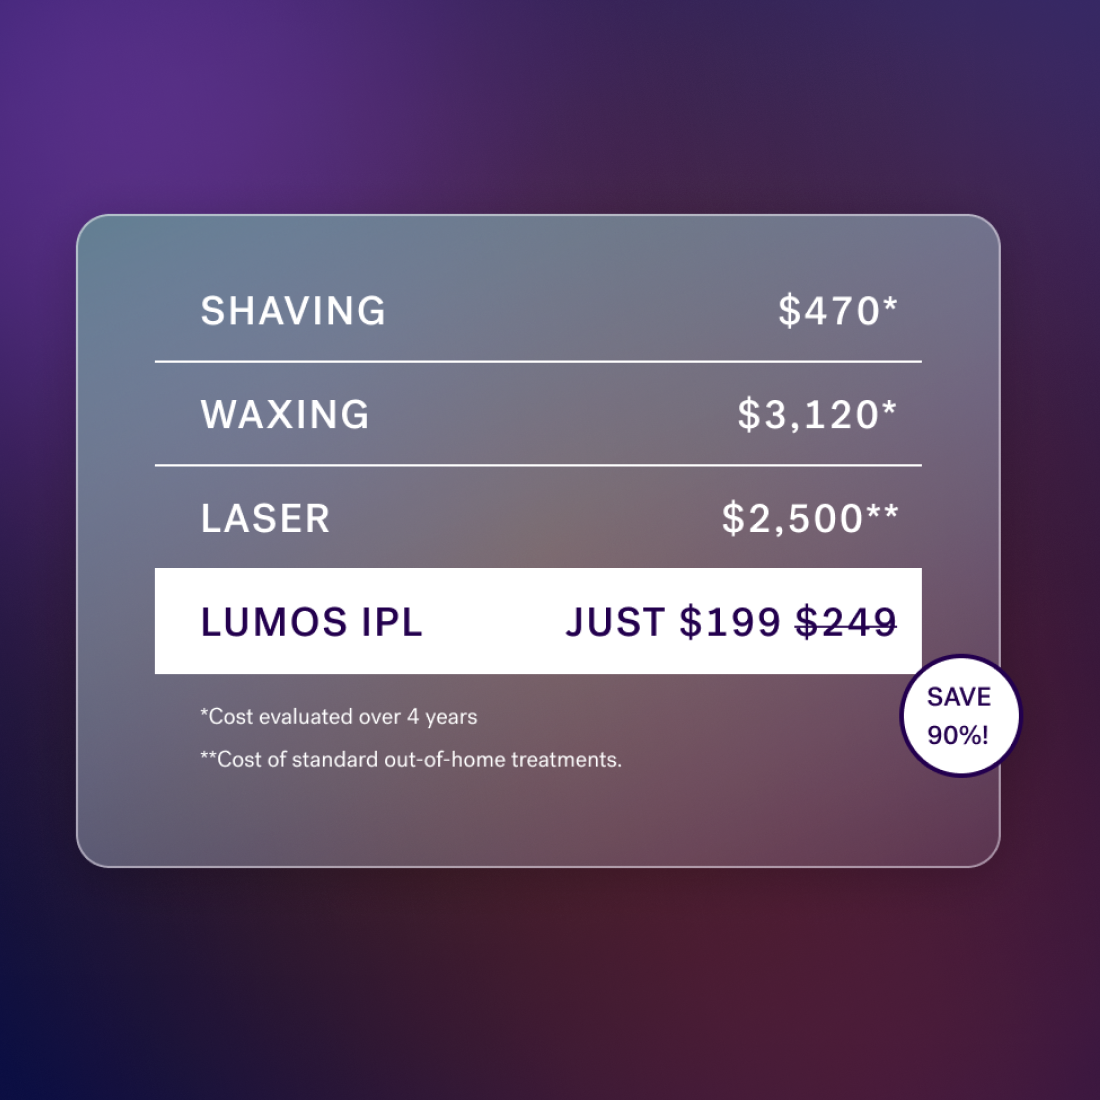 Lavender Lust - Price comparison chart showing costs for shaving, waxing, laser, and Michael Todd Beauty Lumos IPL hair removal. Michael Todd Beauty Lumos IPL discounted from $249 to $199 with a 90% savings claim on non-invasive hair removal. Footnotes provide evaluation details.